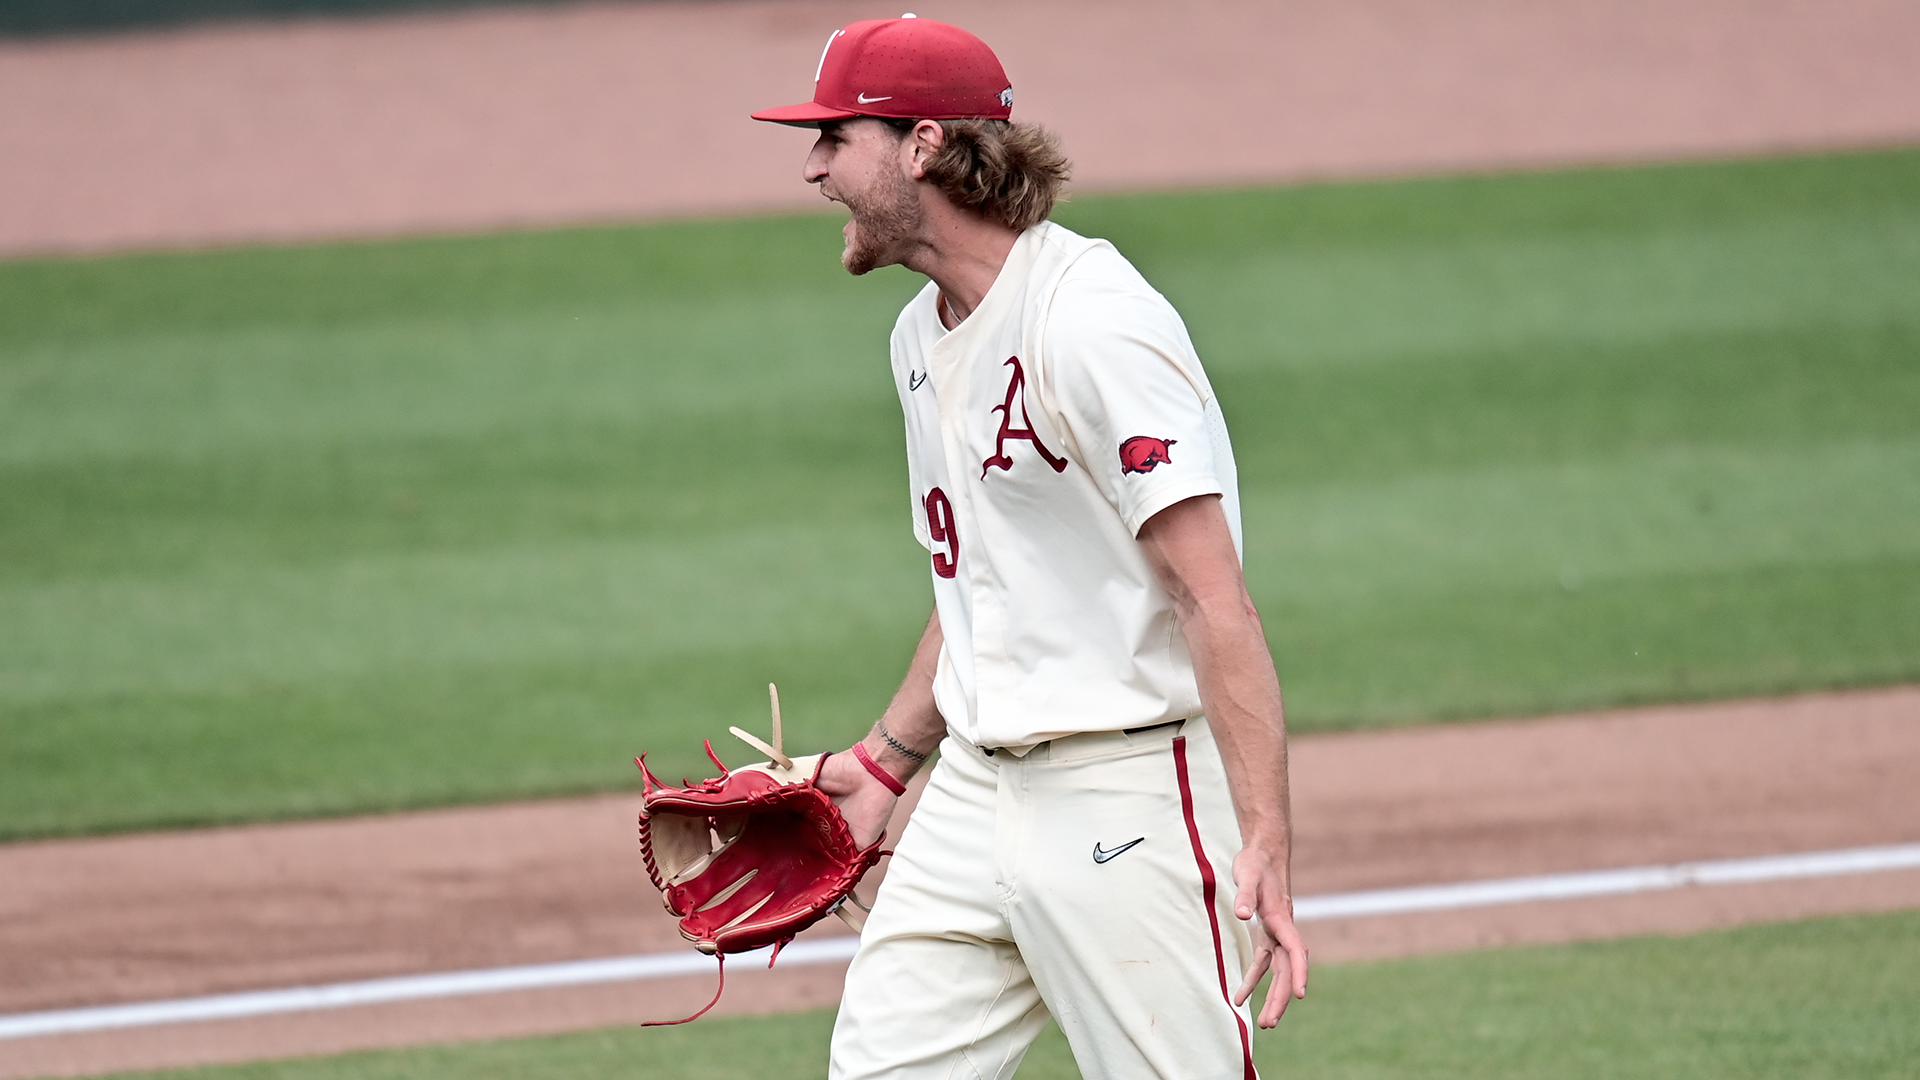 Hollans Complete Game Lifts Hogs to Series Win Arkansas Razorbacks